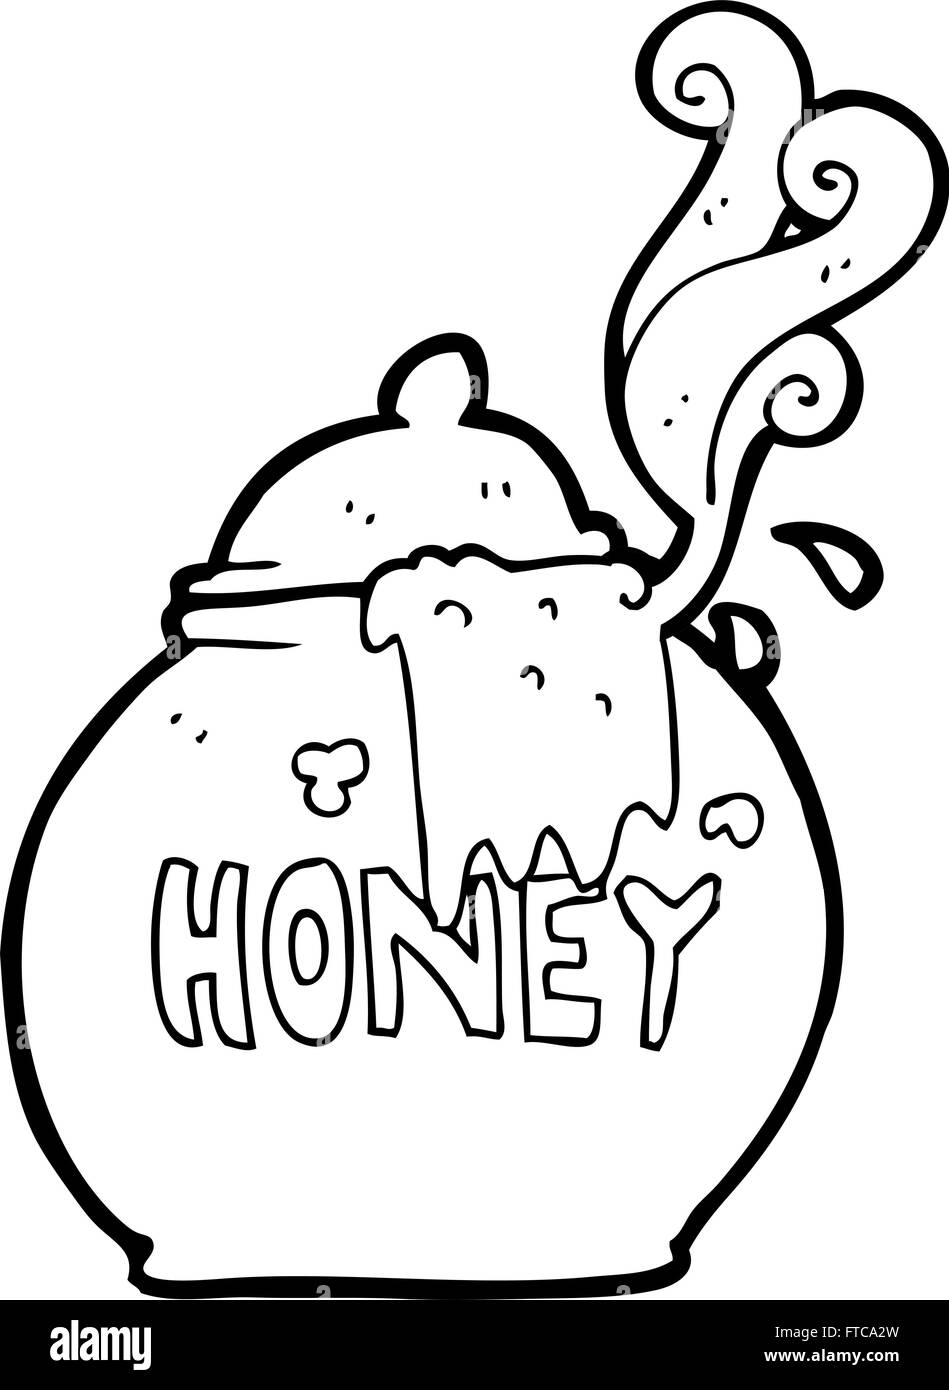 Freehand Drawn Black And White Cartoon Honey Pot Stock Vector Image And Art Alamy 